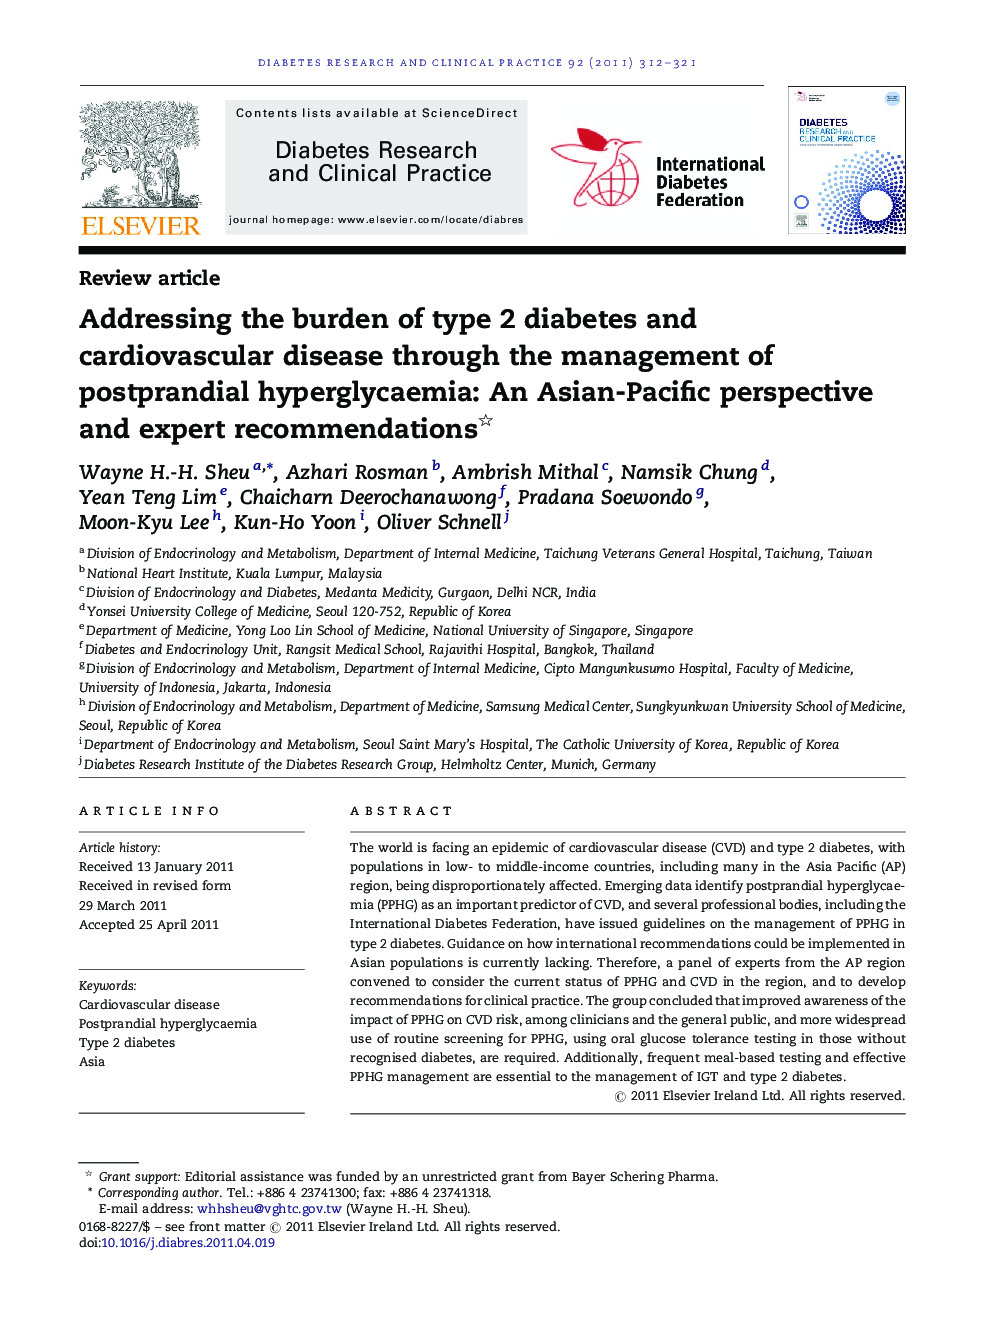 Addressing the burden of type 2 diabetes and cardiovascular disease through the management of postprandial hyperglycaemia: An Asian-Pacific perspective and expert recommendations 